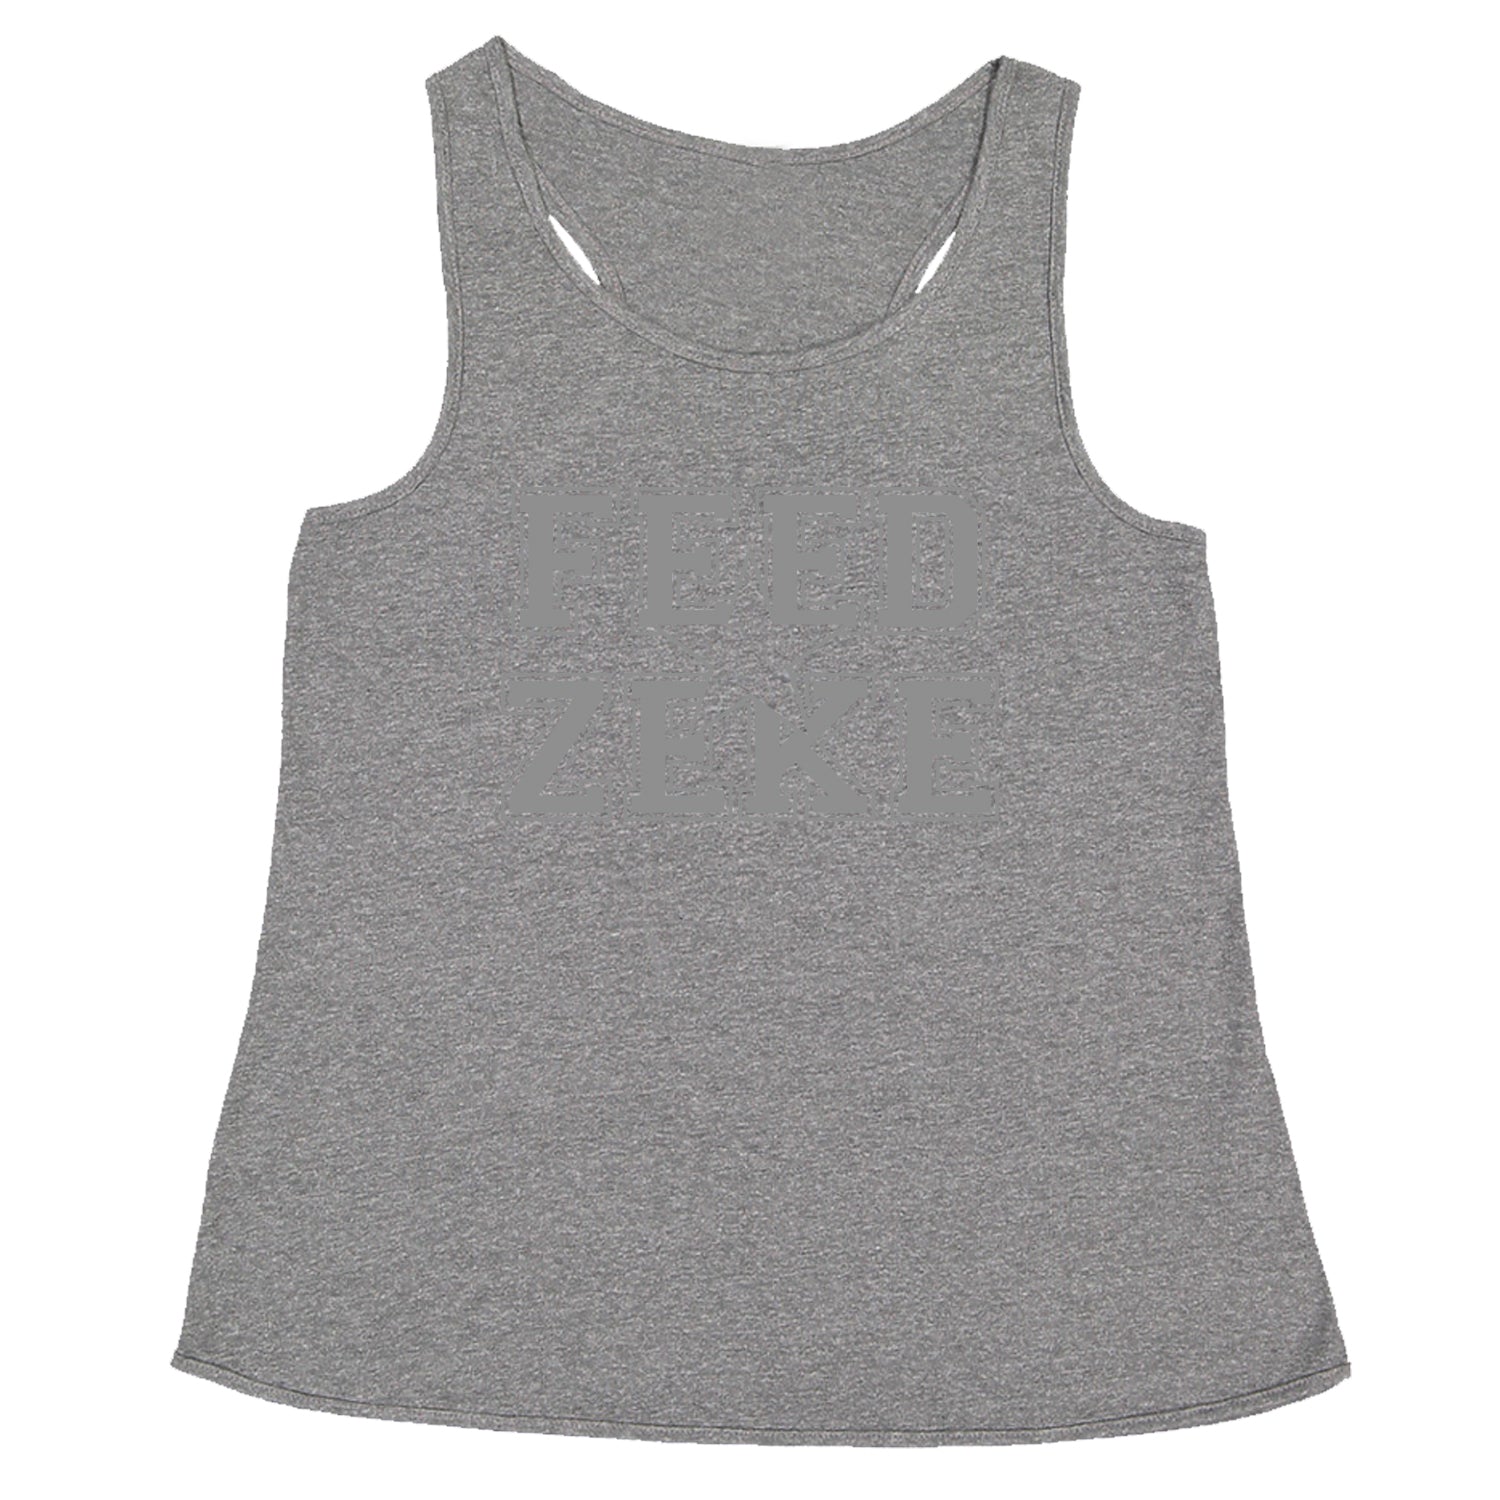 Feed Zeke Racerback Tank Top for Women #expressiontees by Expression Tees